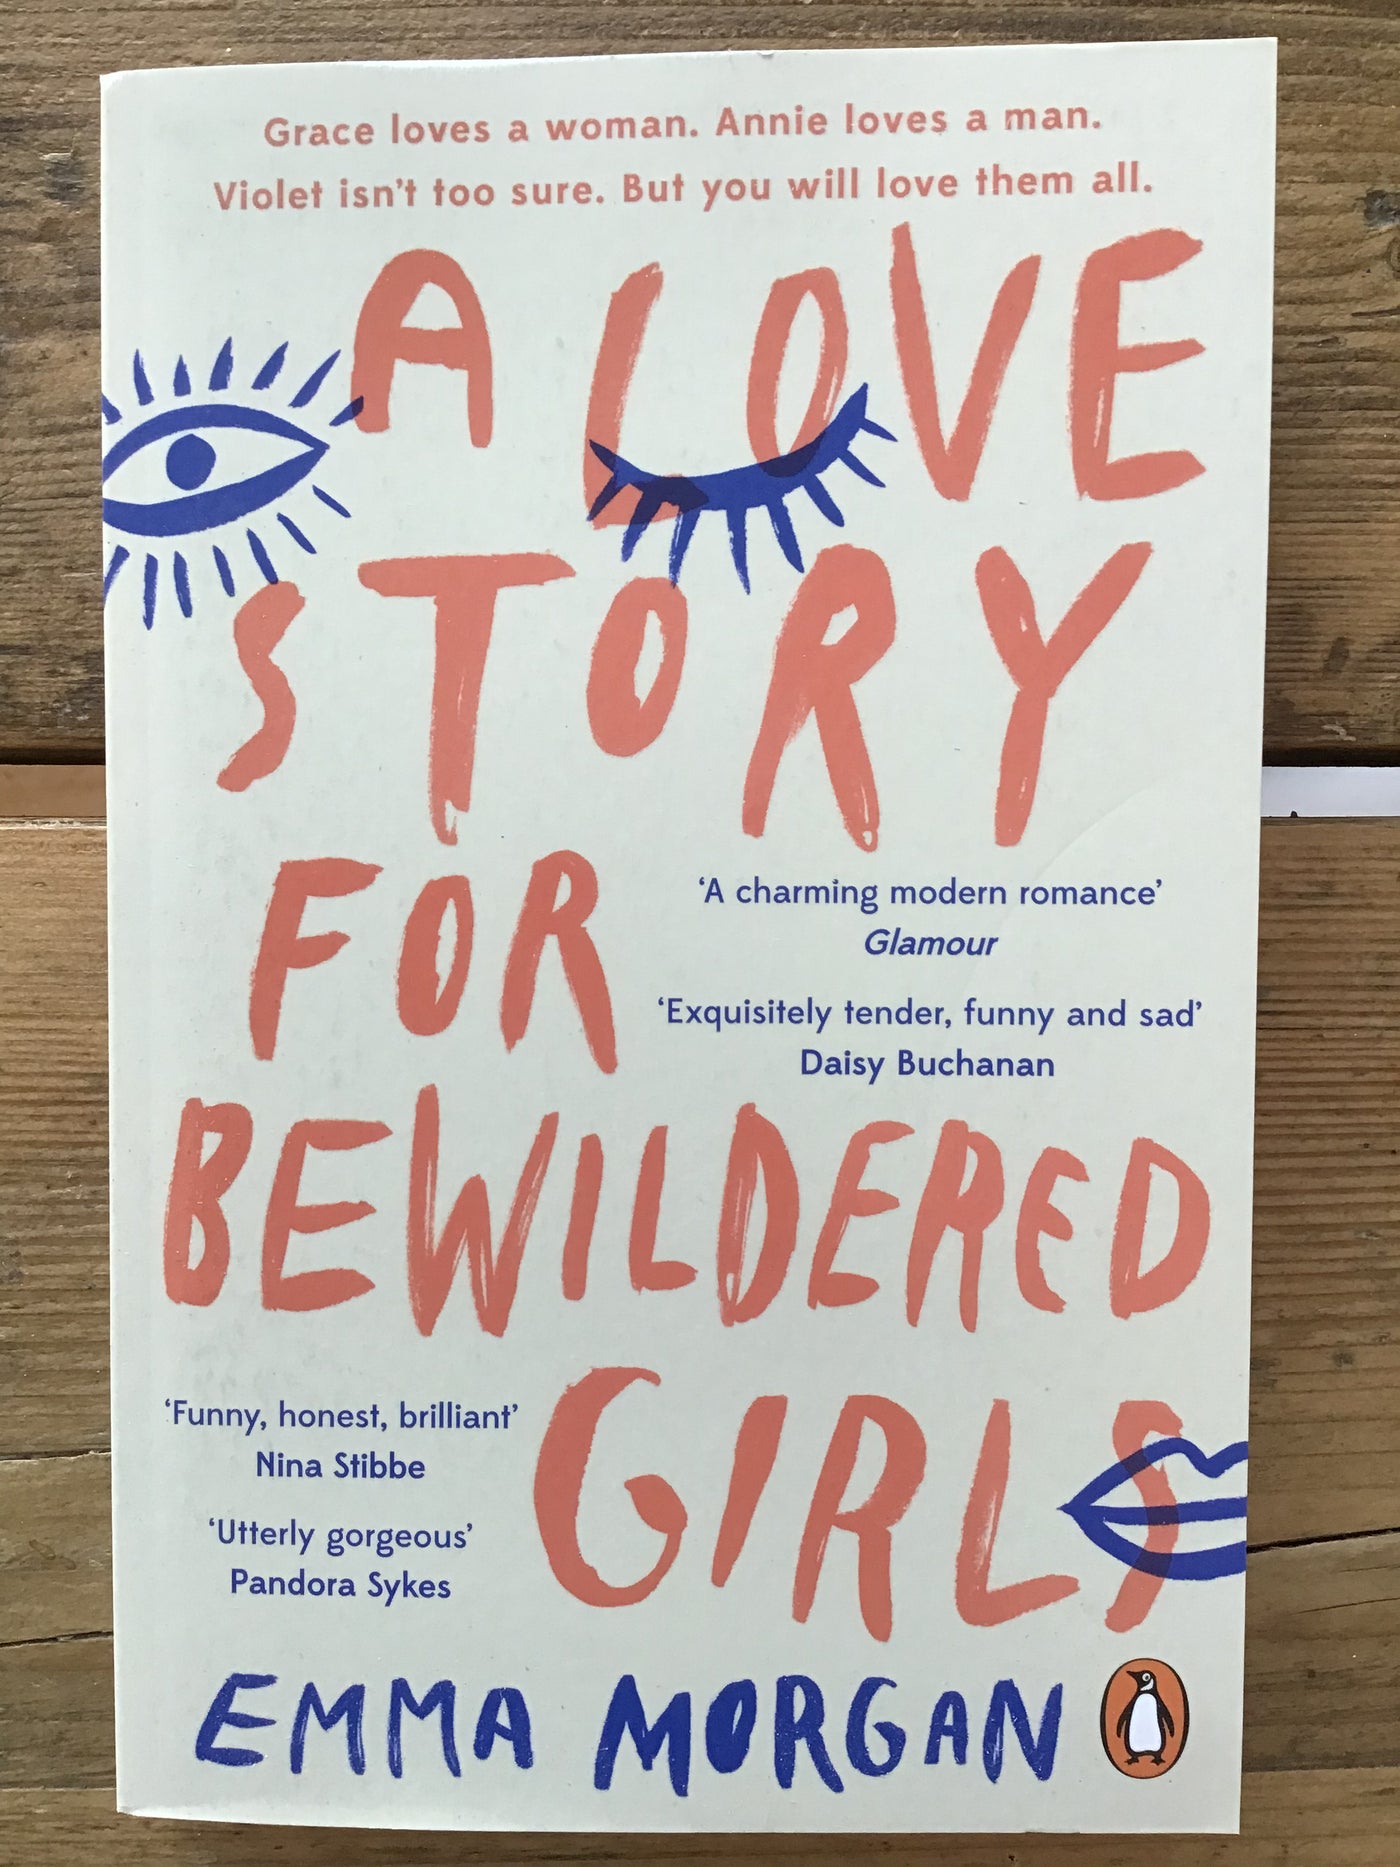 A Love Story for Bewildered Girls